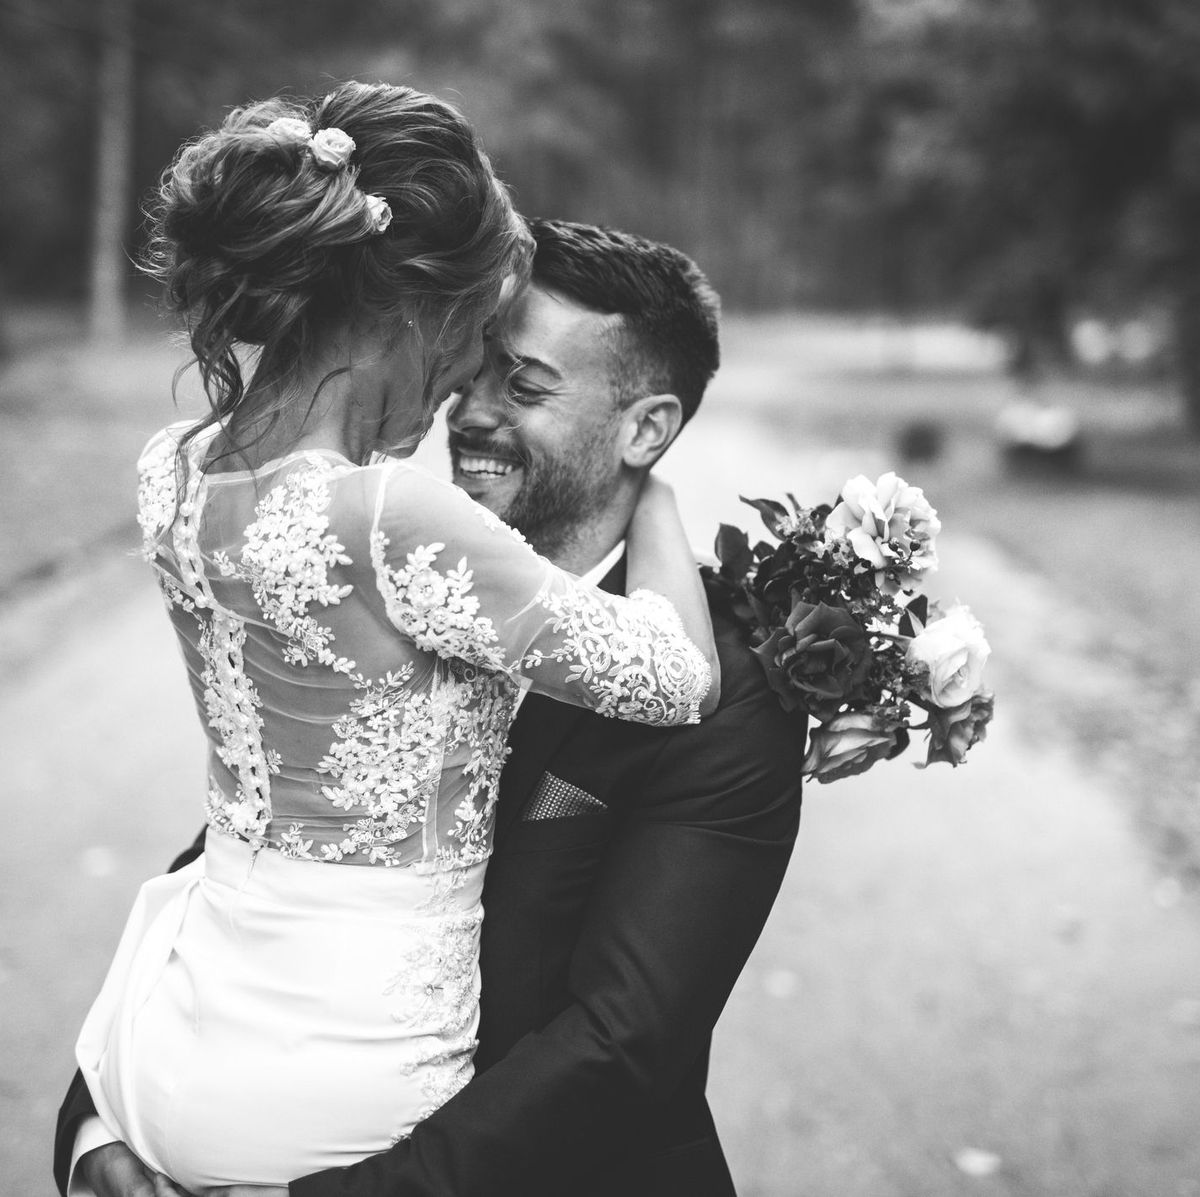 51 Wedding Instagram Captions for the Bride, Groom and Guests